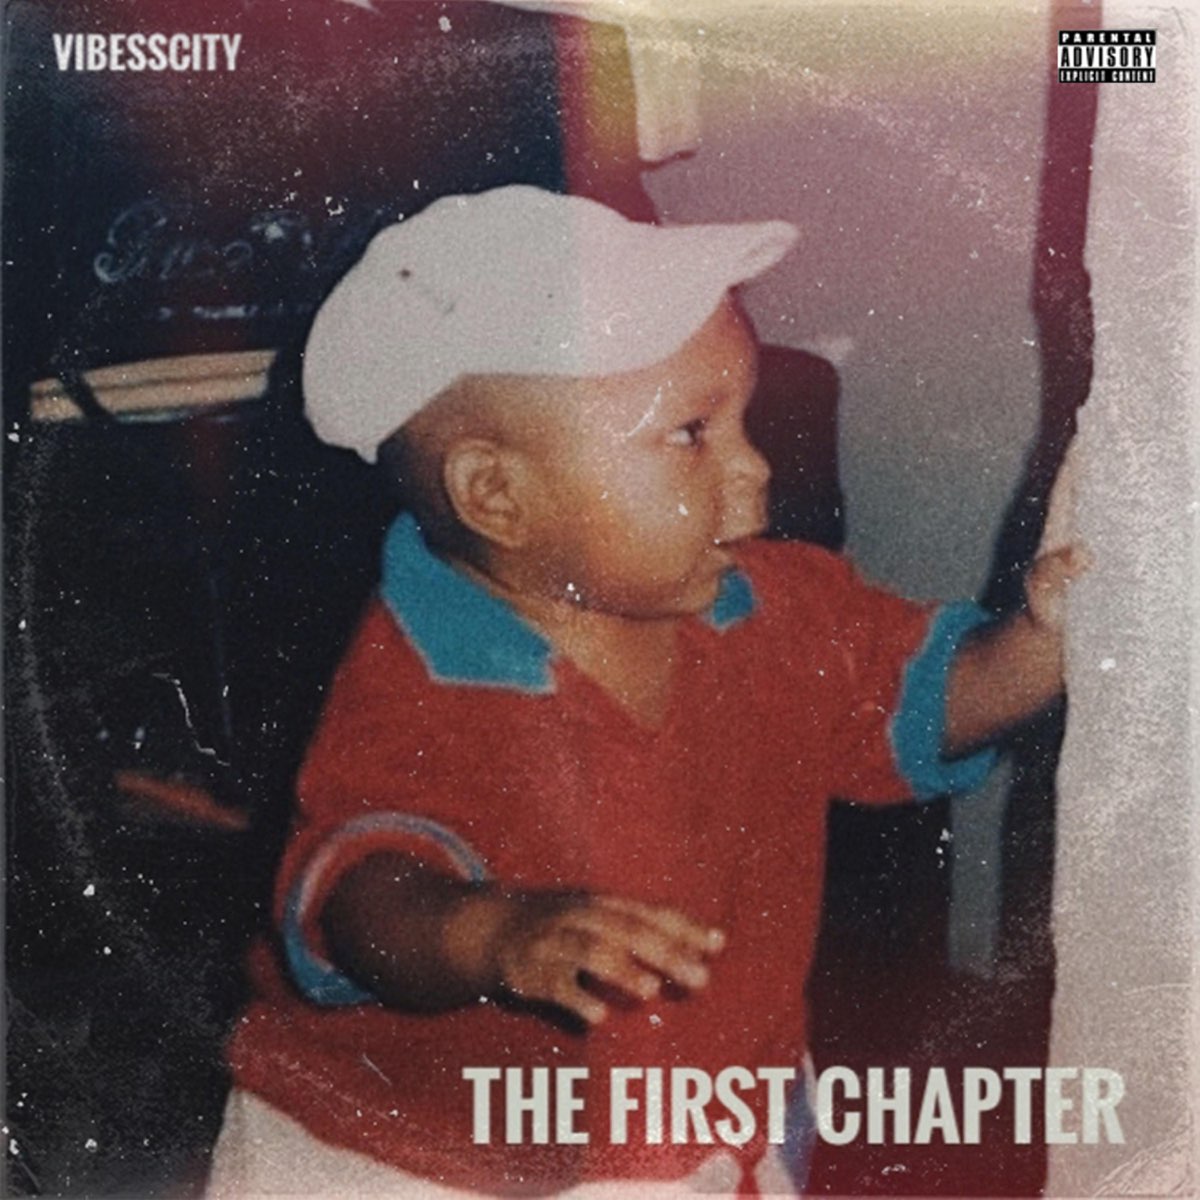 ‎The First Chapter - EP by Vibesscity on Apple Music